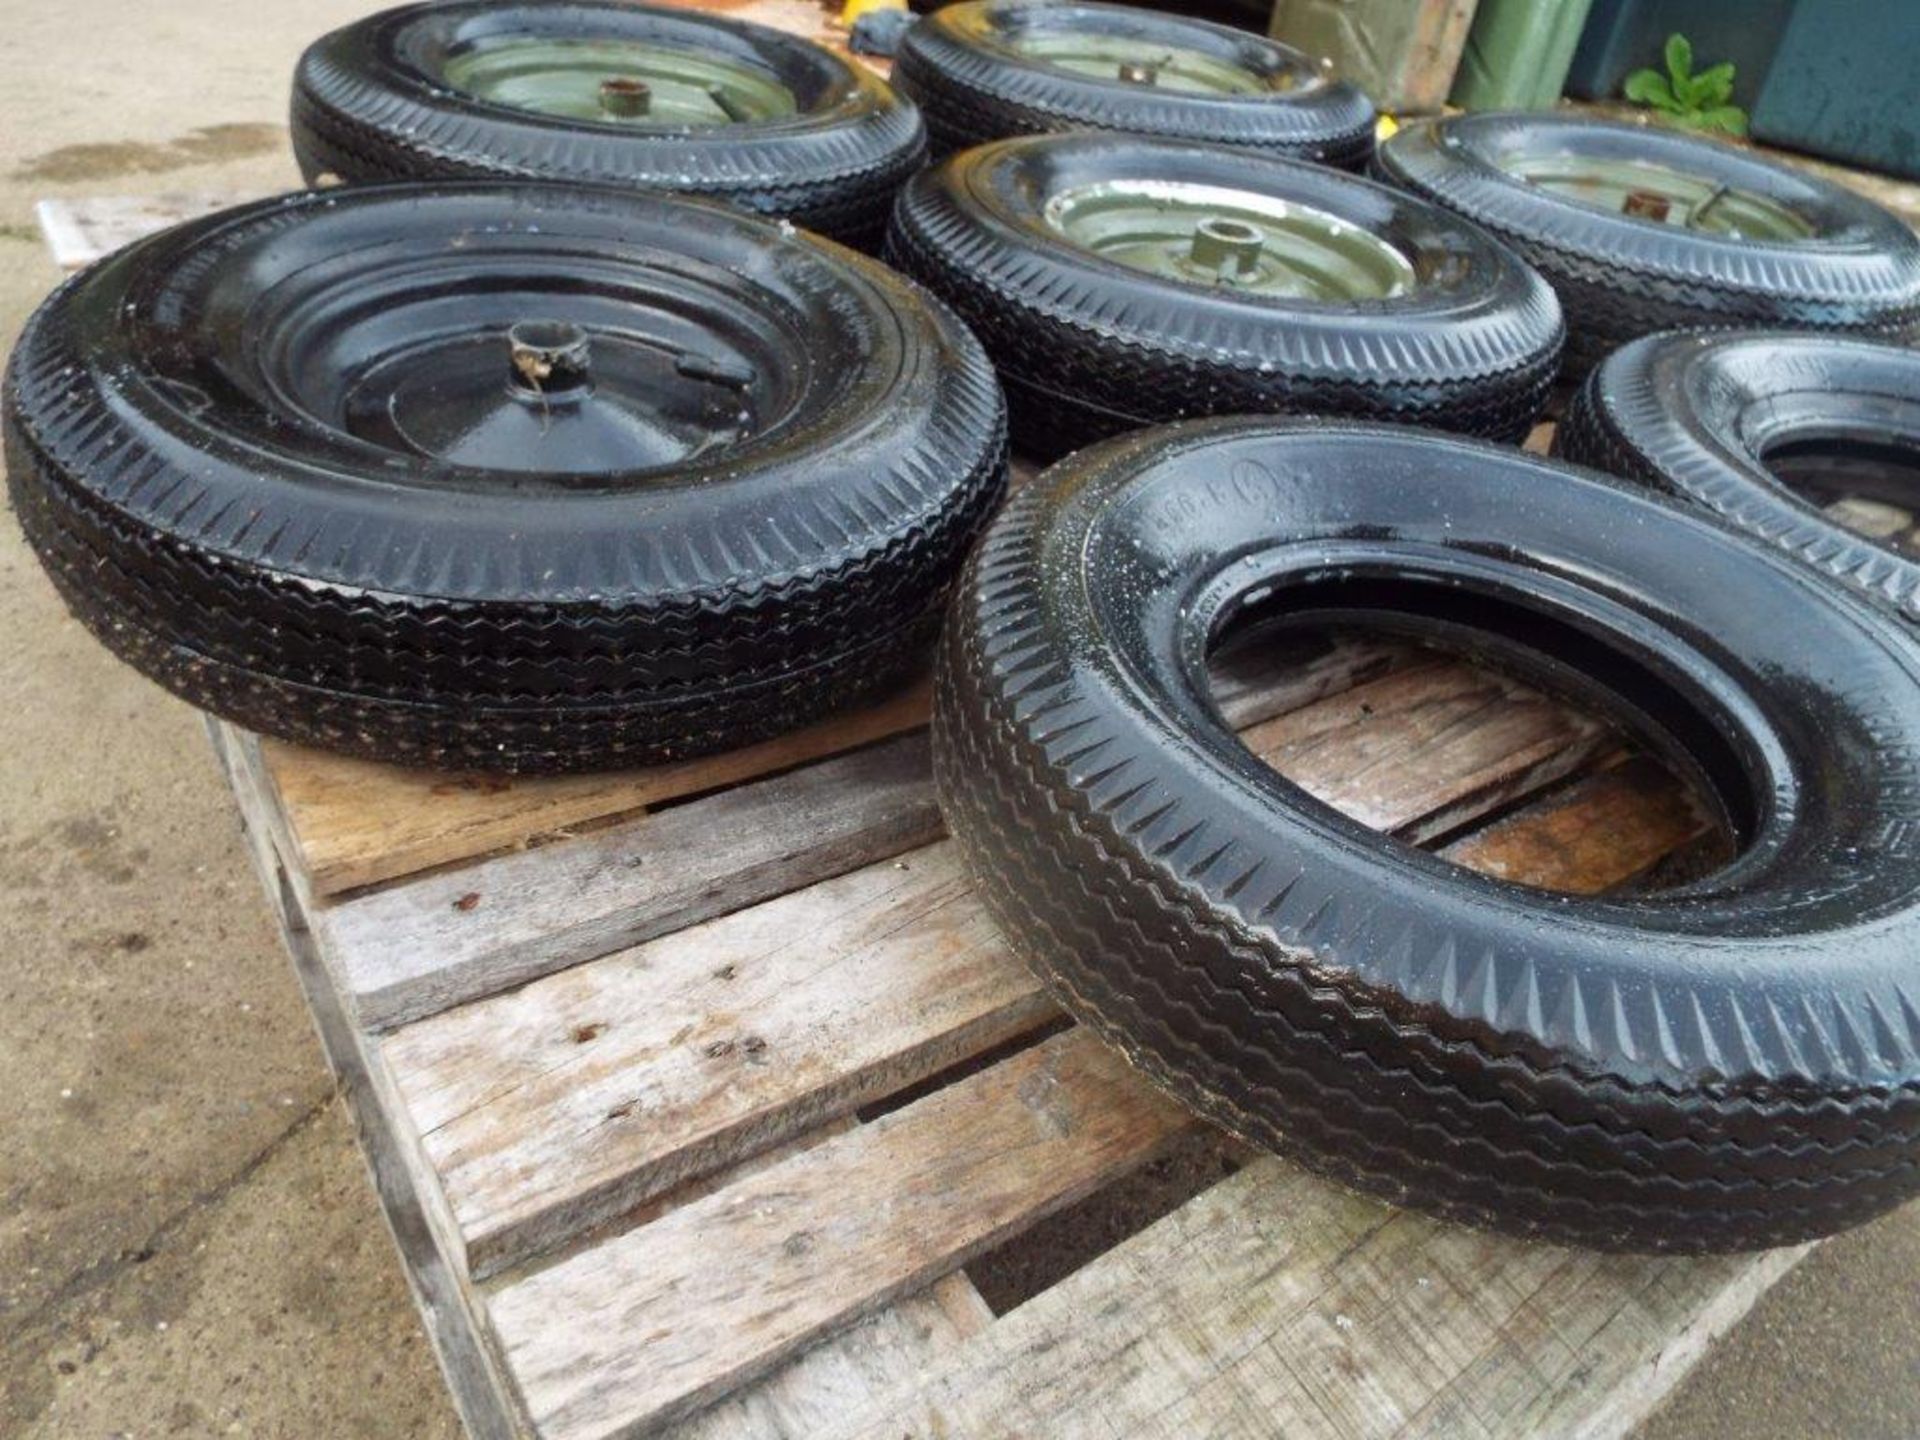 7 x Vredestein 4.00-8 Trailer Tyres with 5 x Rims - Image 11 of 12